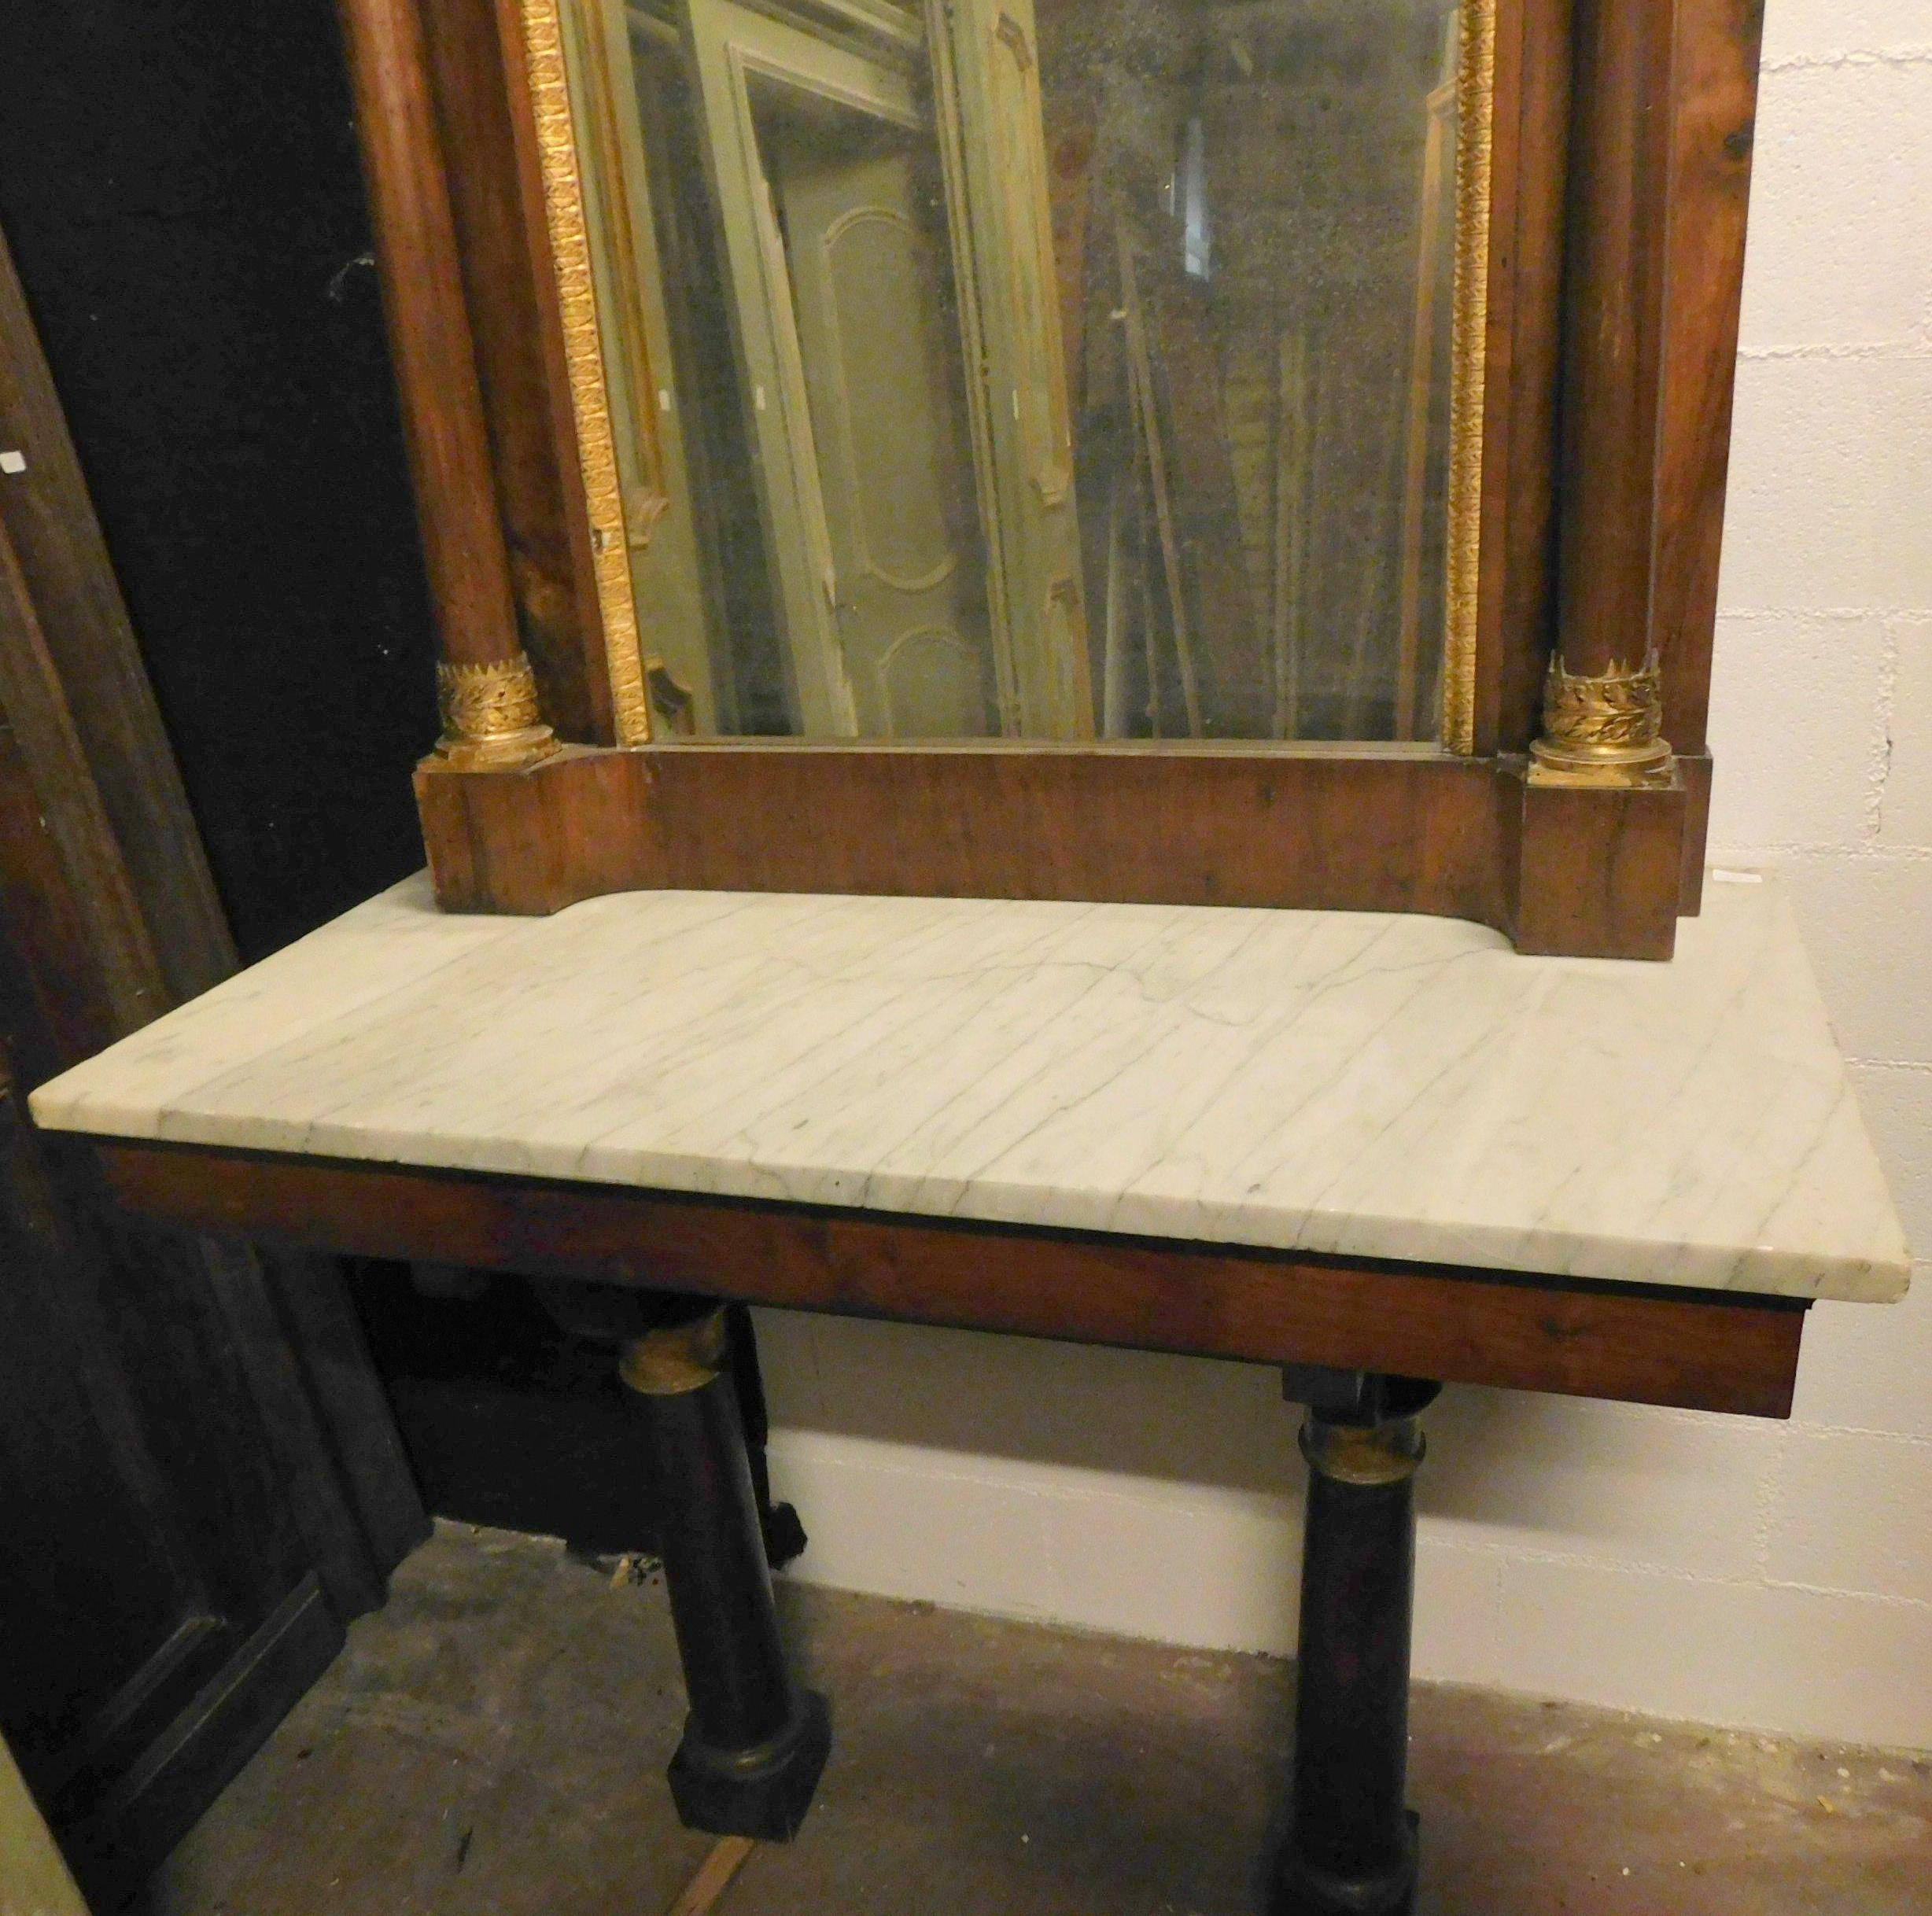 Italian Antique Empire Style Console Table in Walnut with Original Mirror, 19th Century For Sale